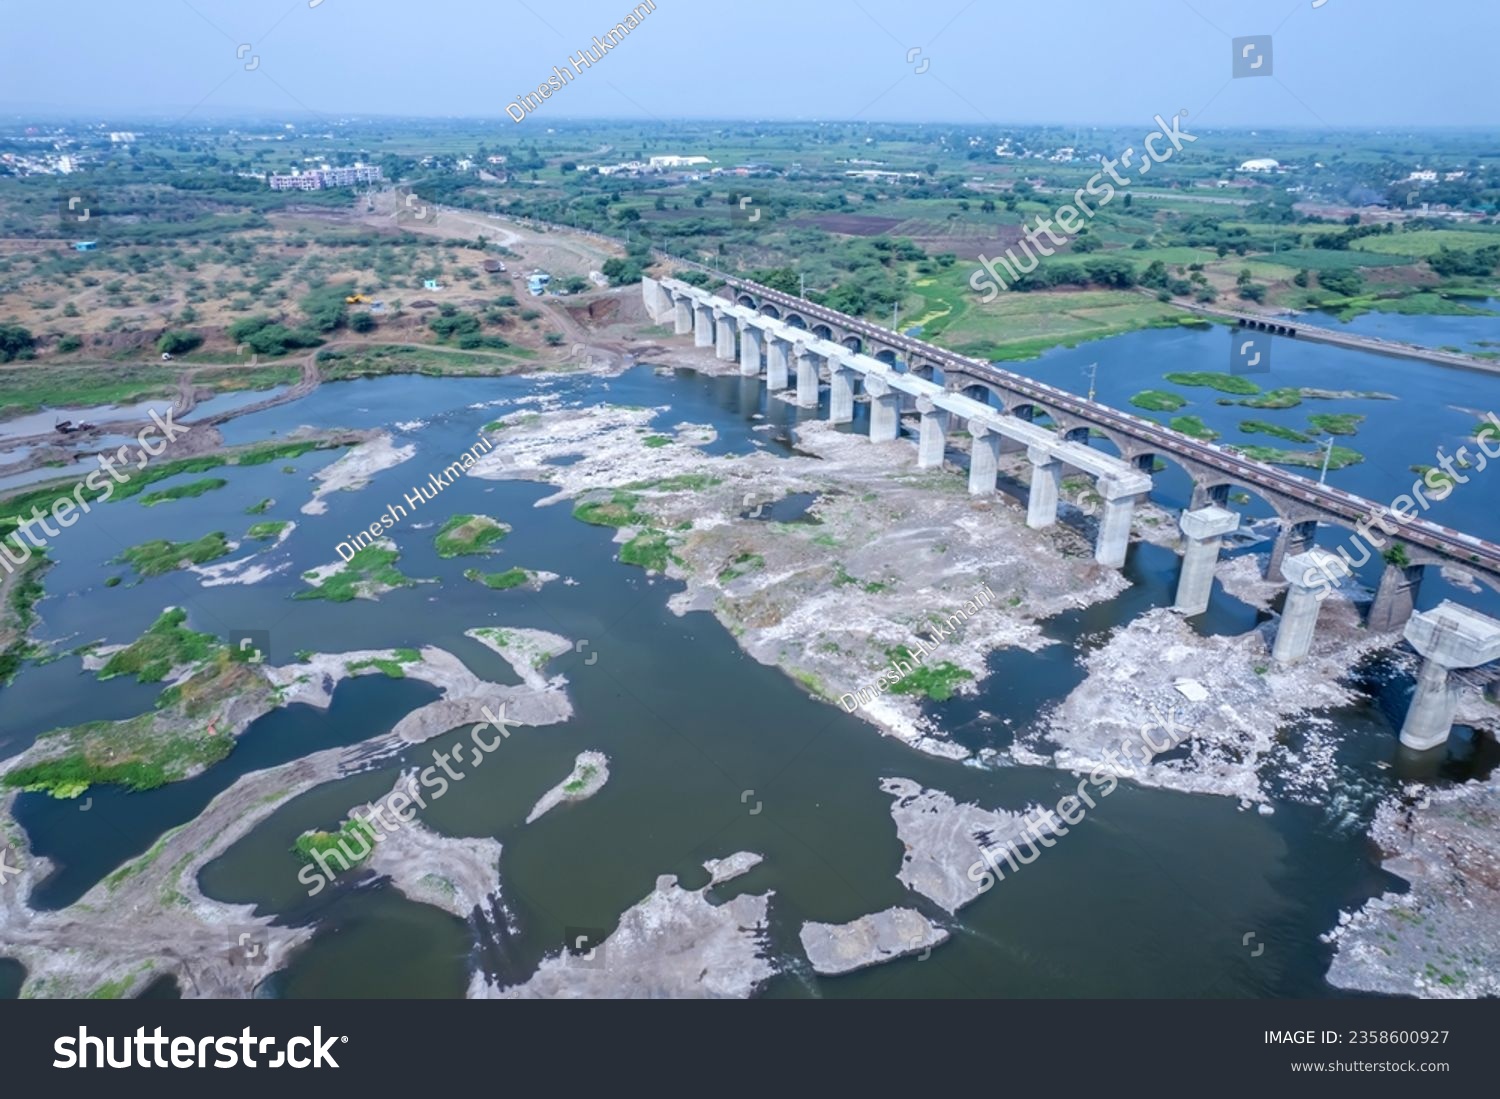 Aerial footage of the River Bhima and surrounding landscape including bridges at Daund India. #2358600927